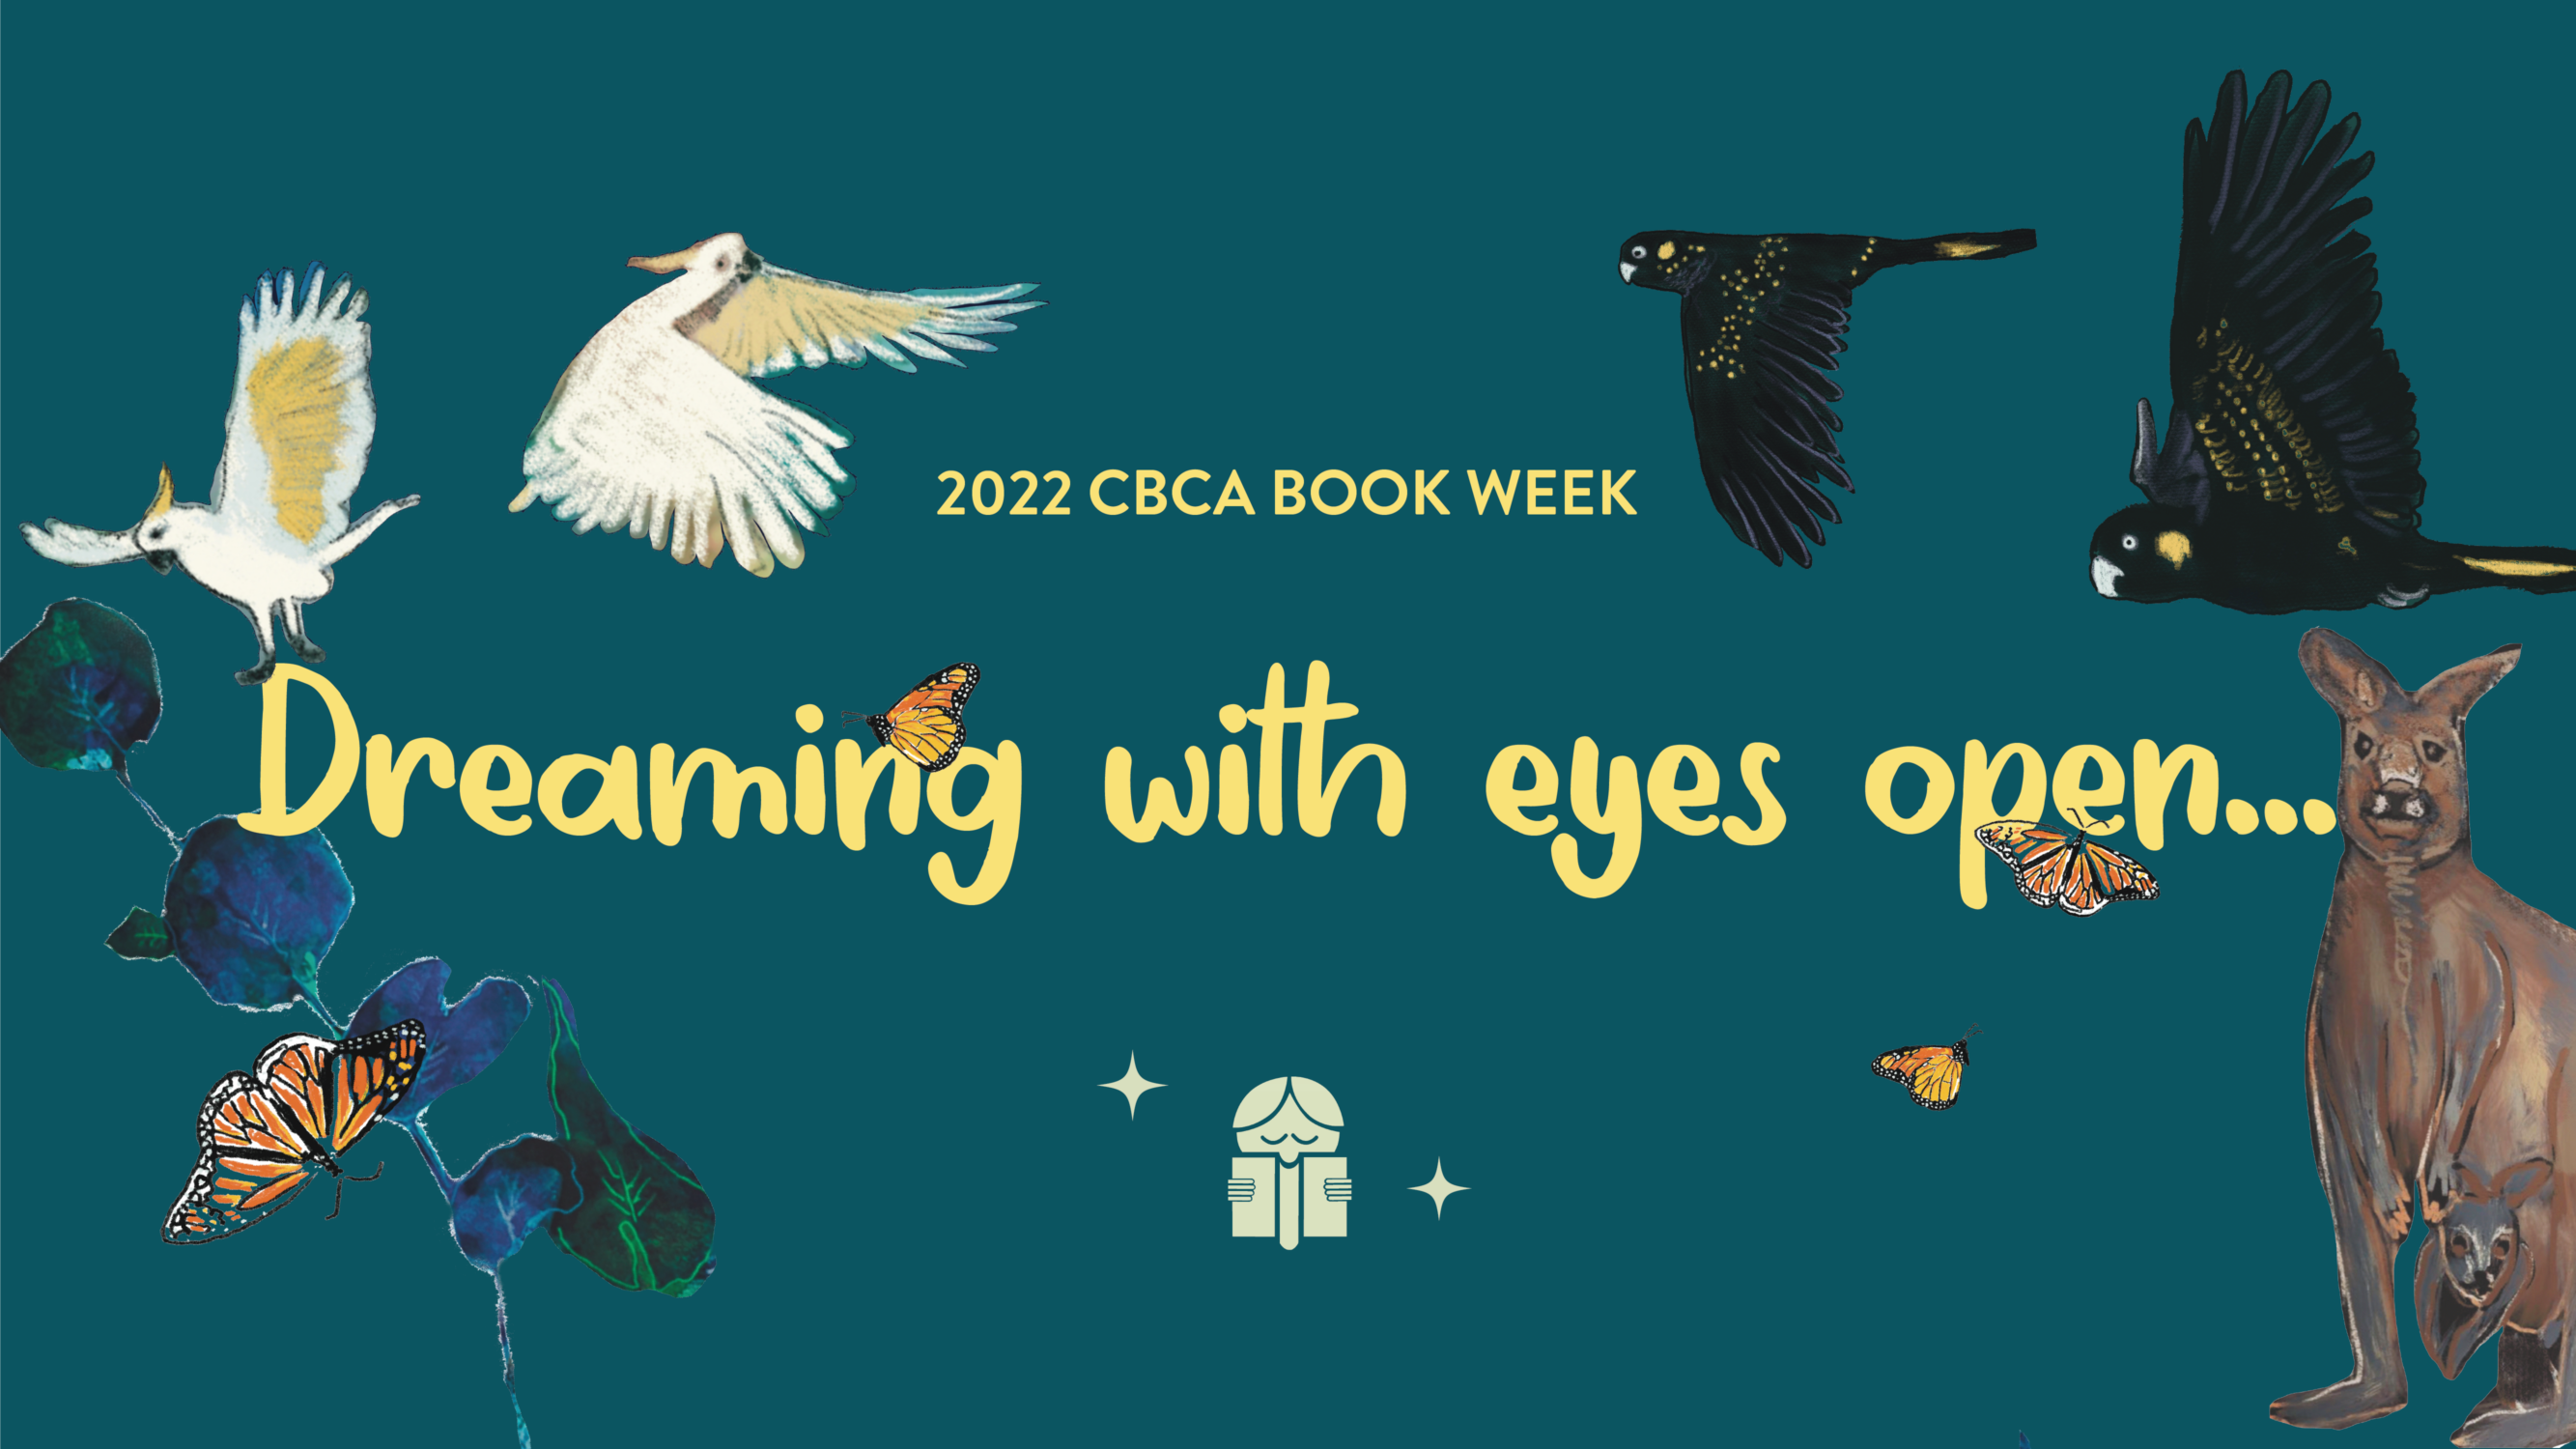 Book Week 2022 Poster - Dreaming with eyes open